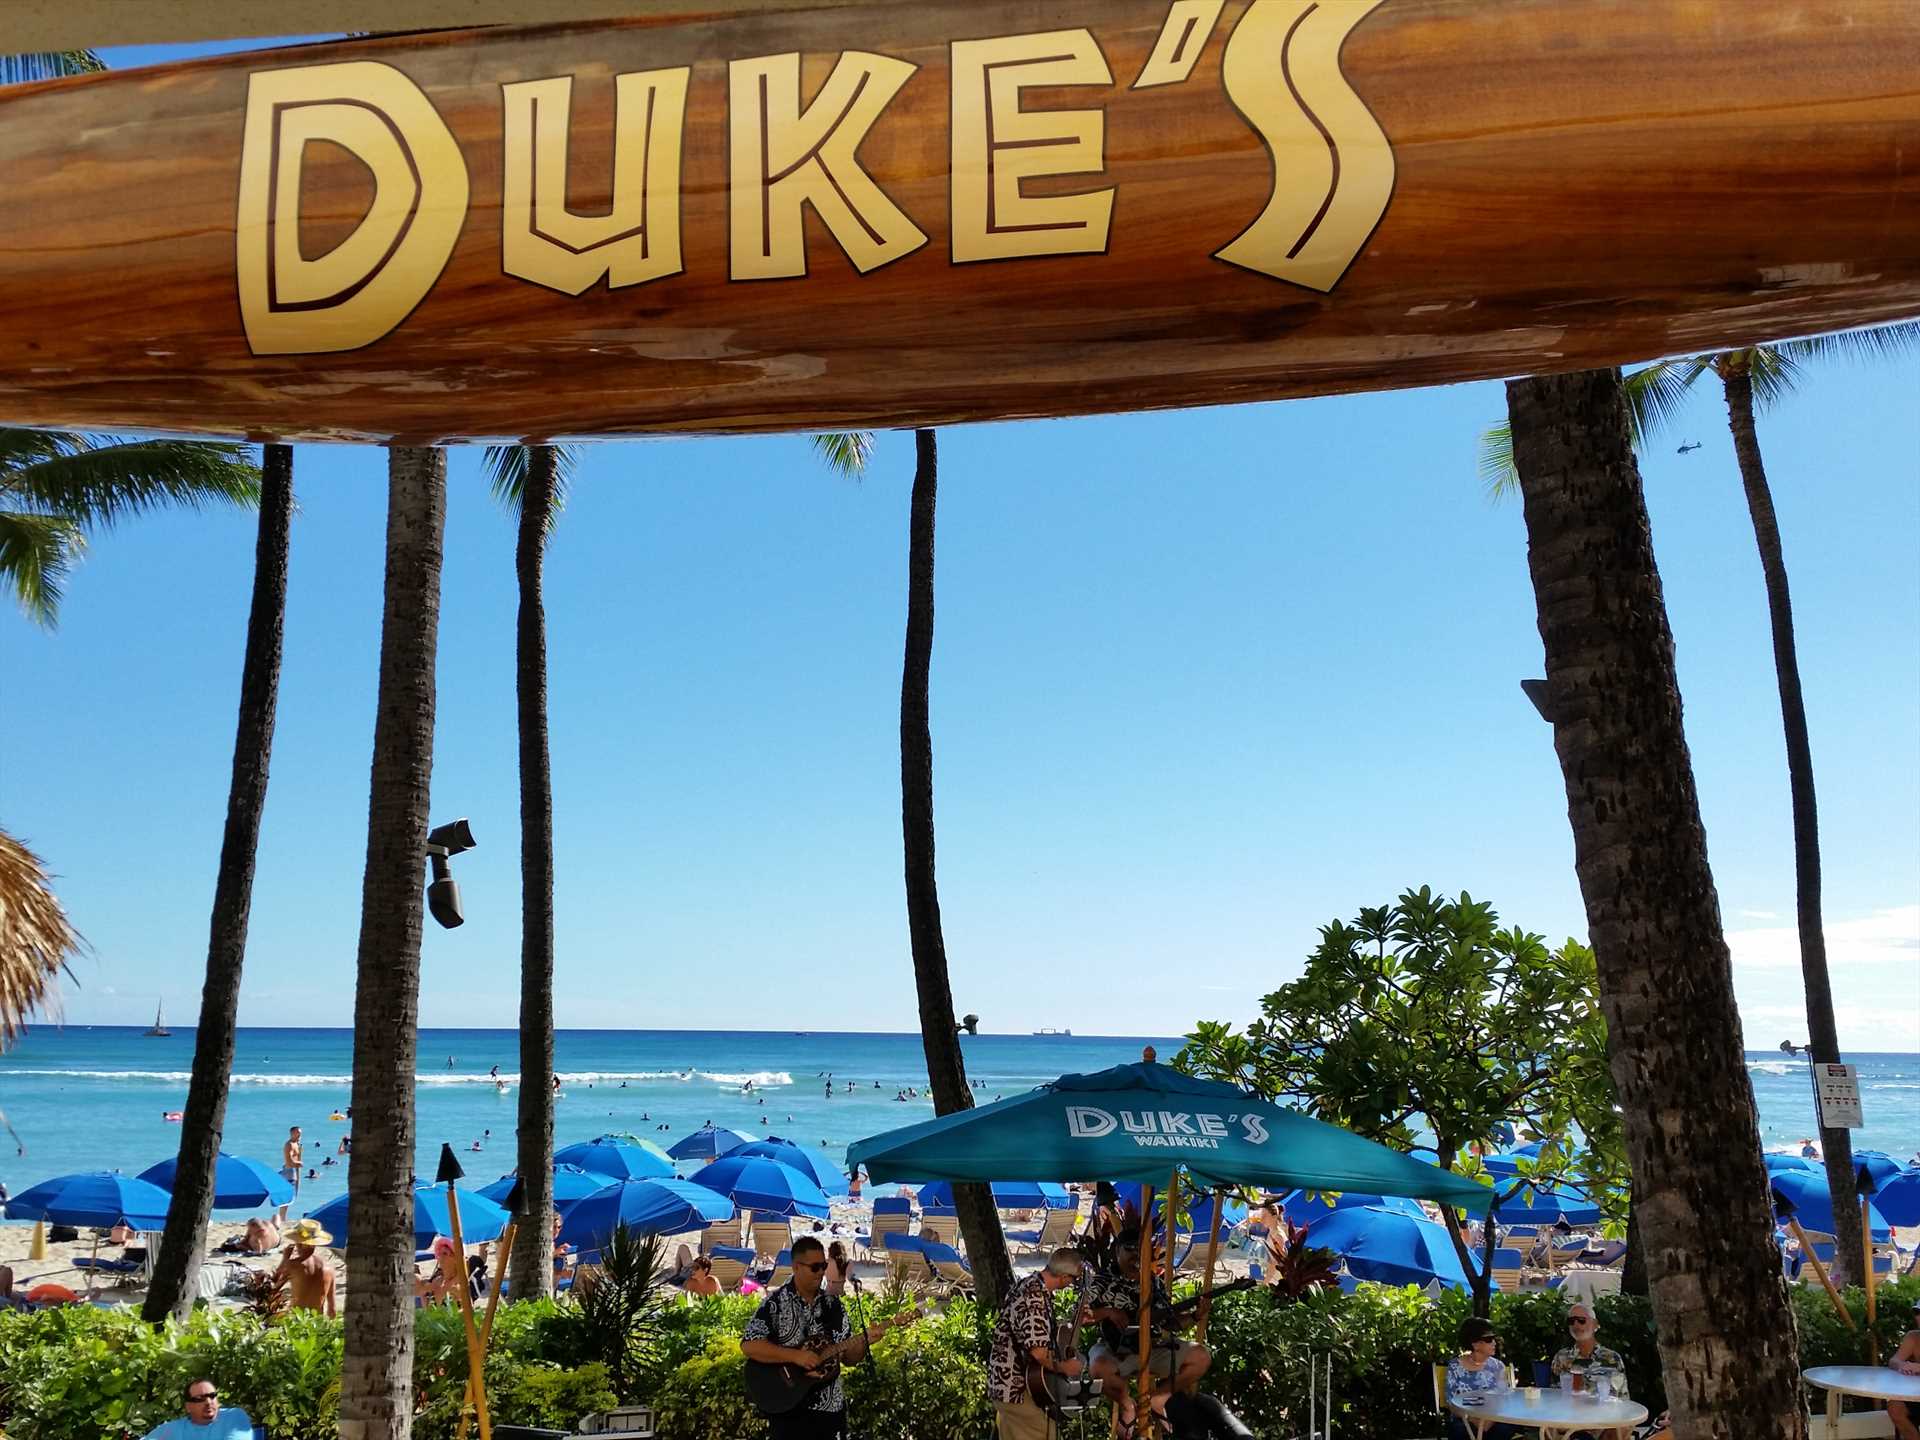 Dukes on the beach is a Blast for music and dancing!